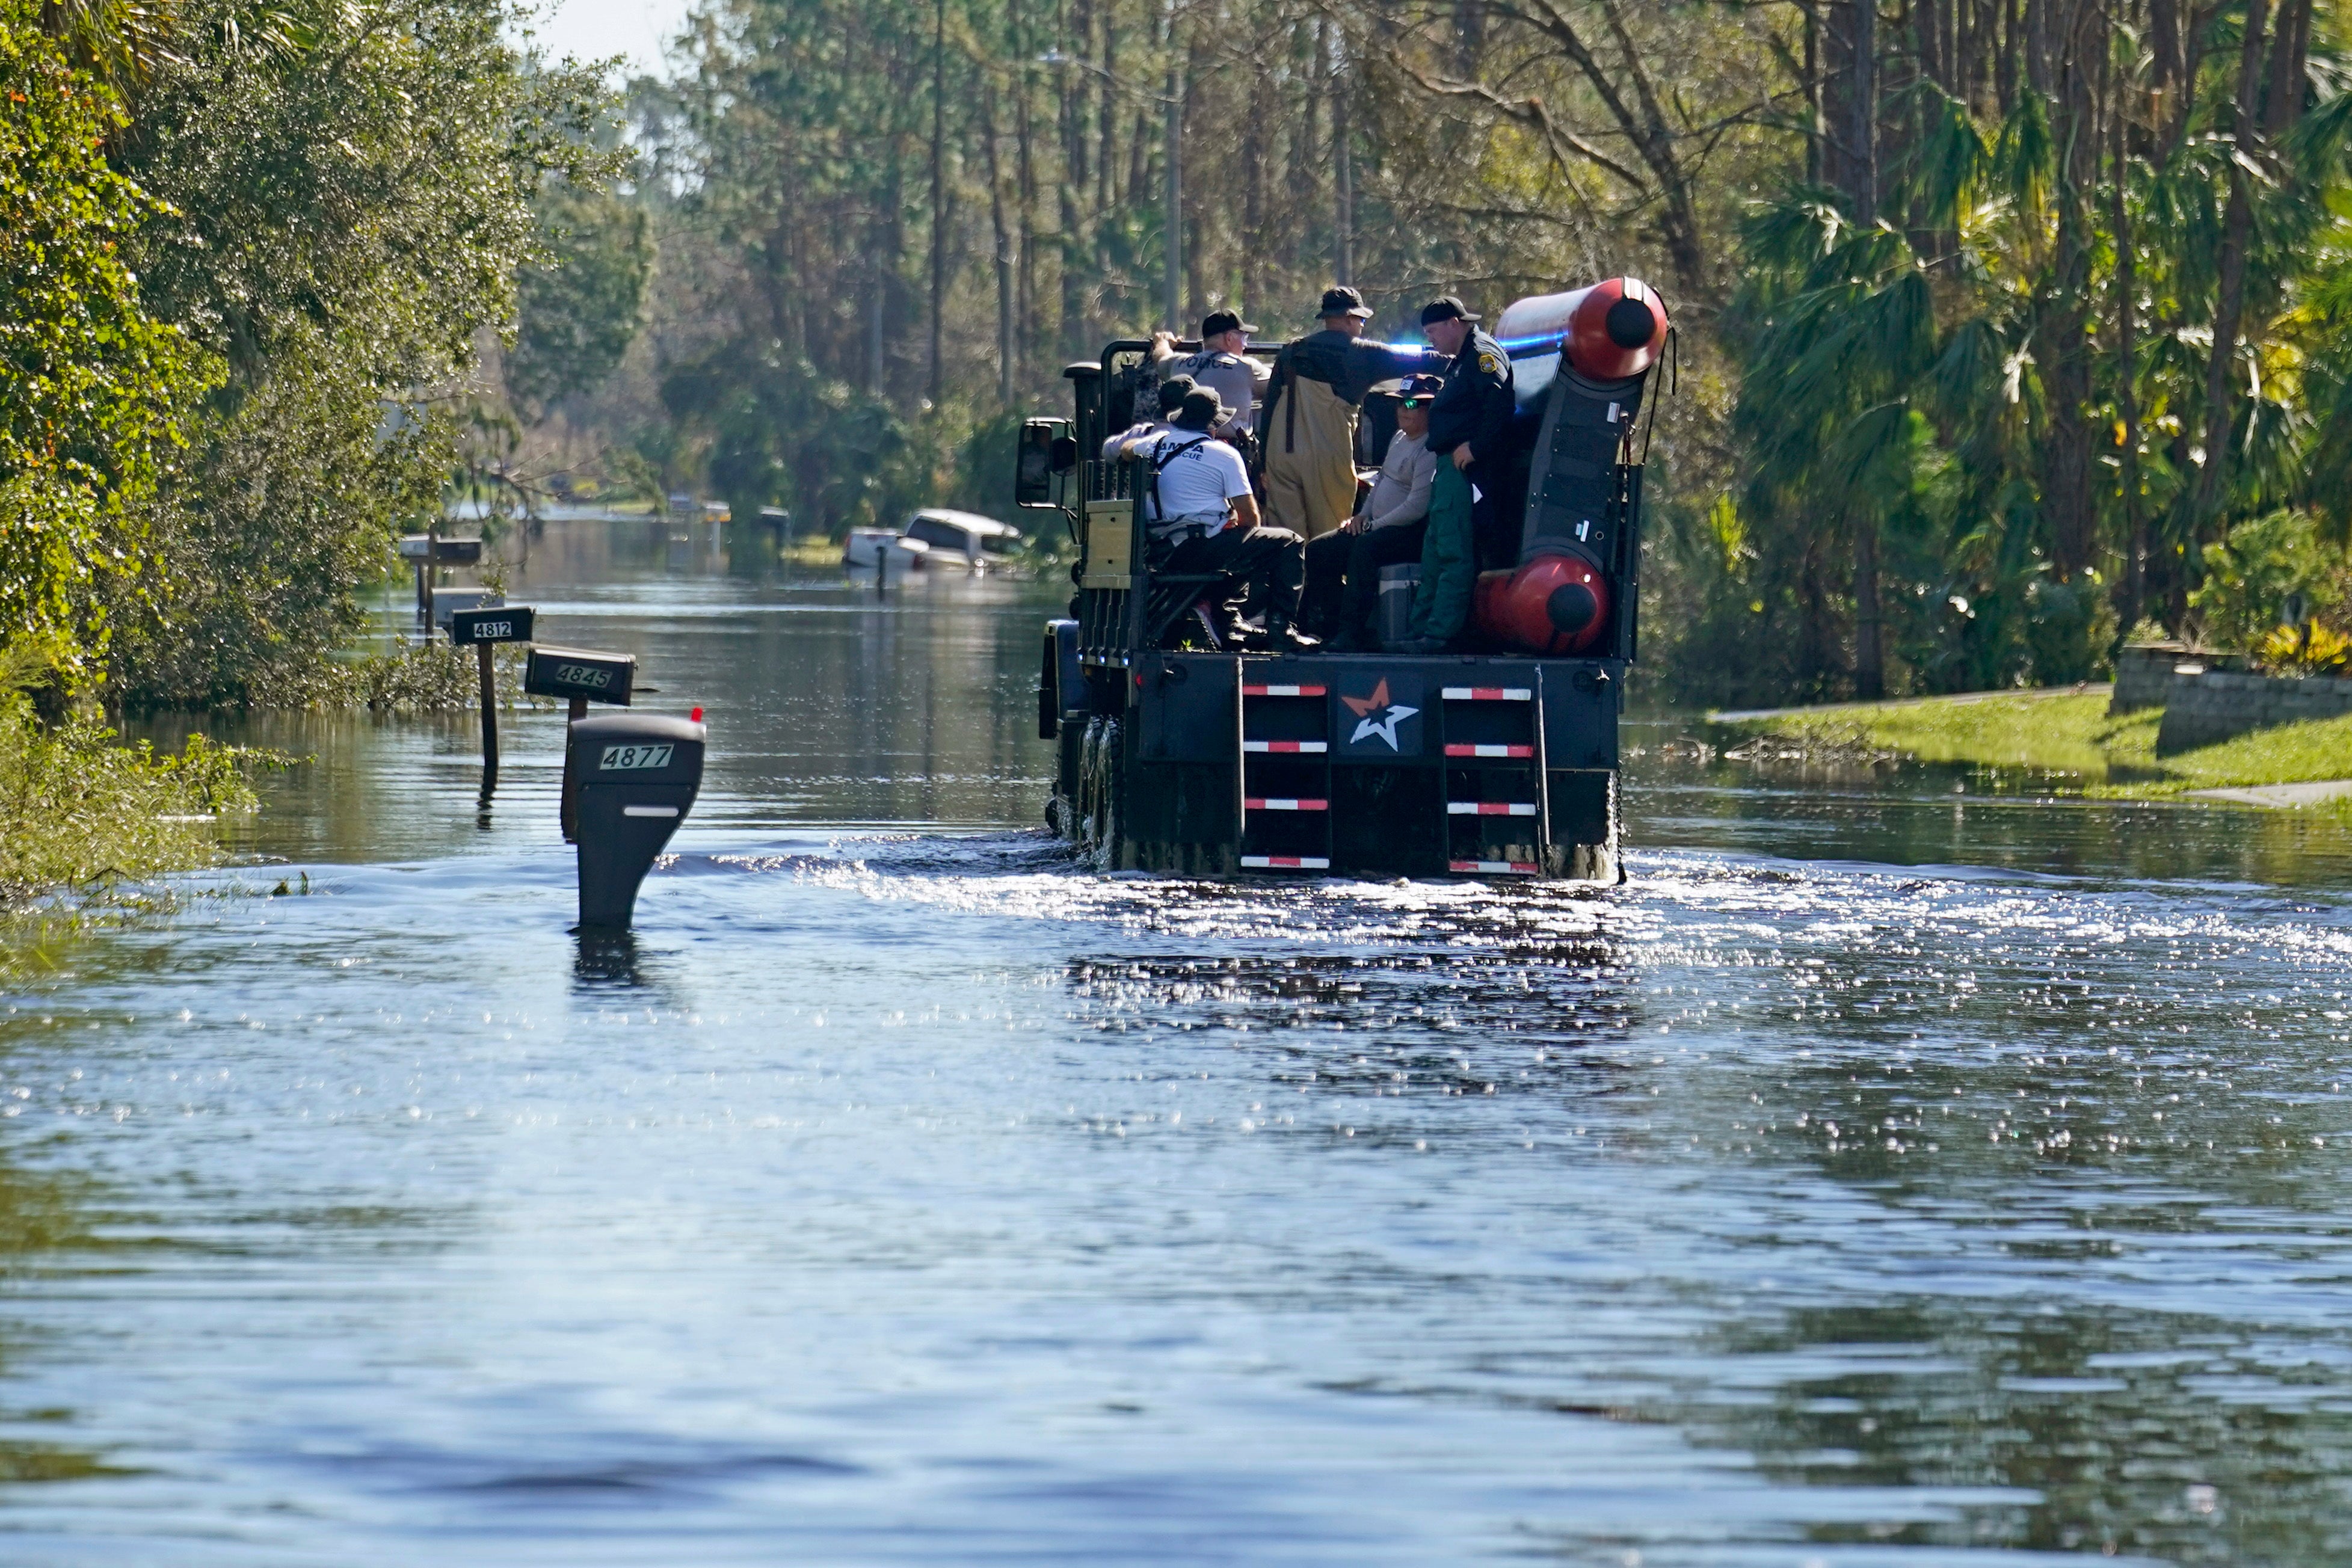 A high water vehicle with responders drives through a flooded neighbourhood in the aftermath of Hurricane Ian in North Port, Florida, Monday, Oct. 3, 2022 (Photo: Gerald Herbert, AP)